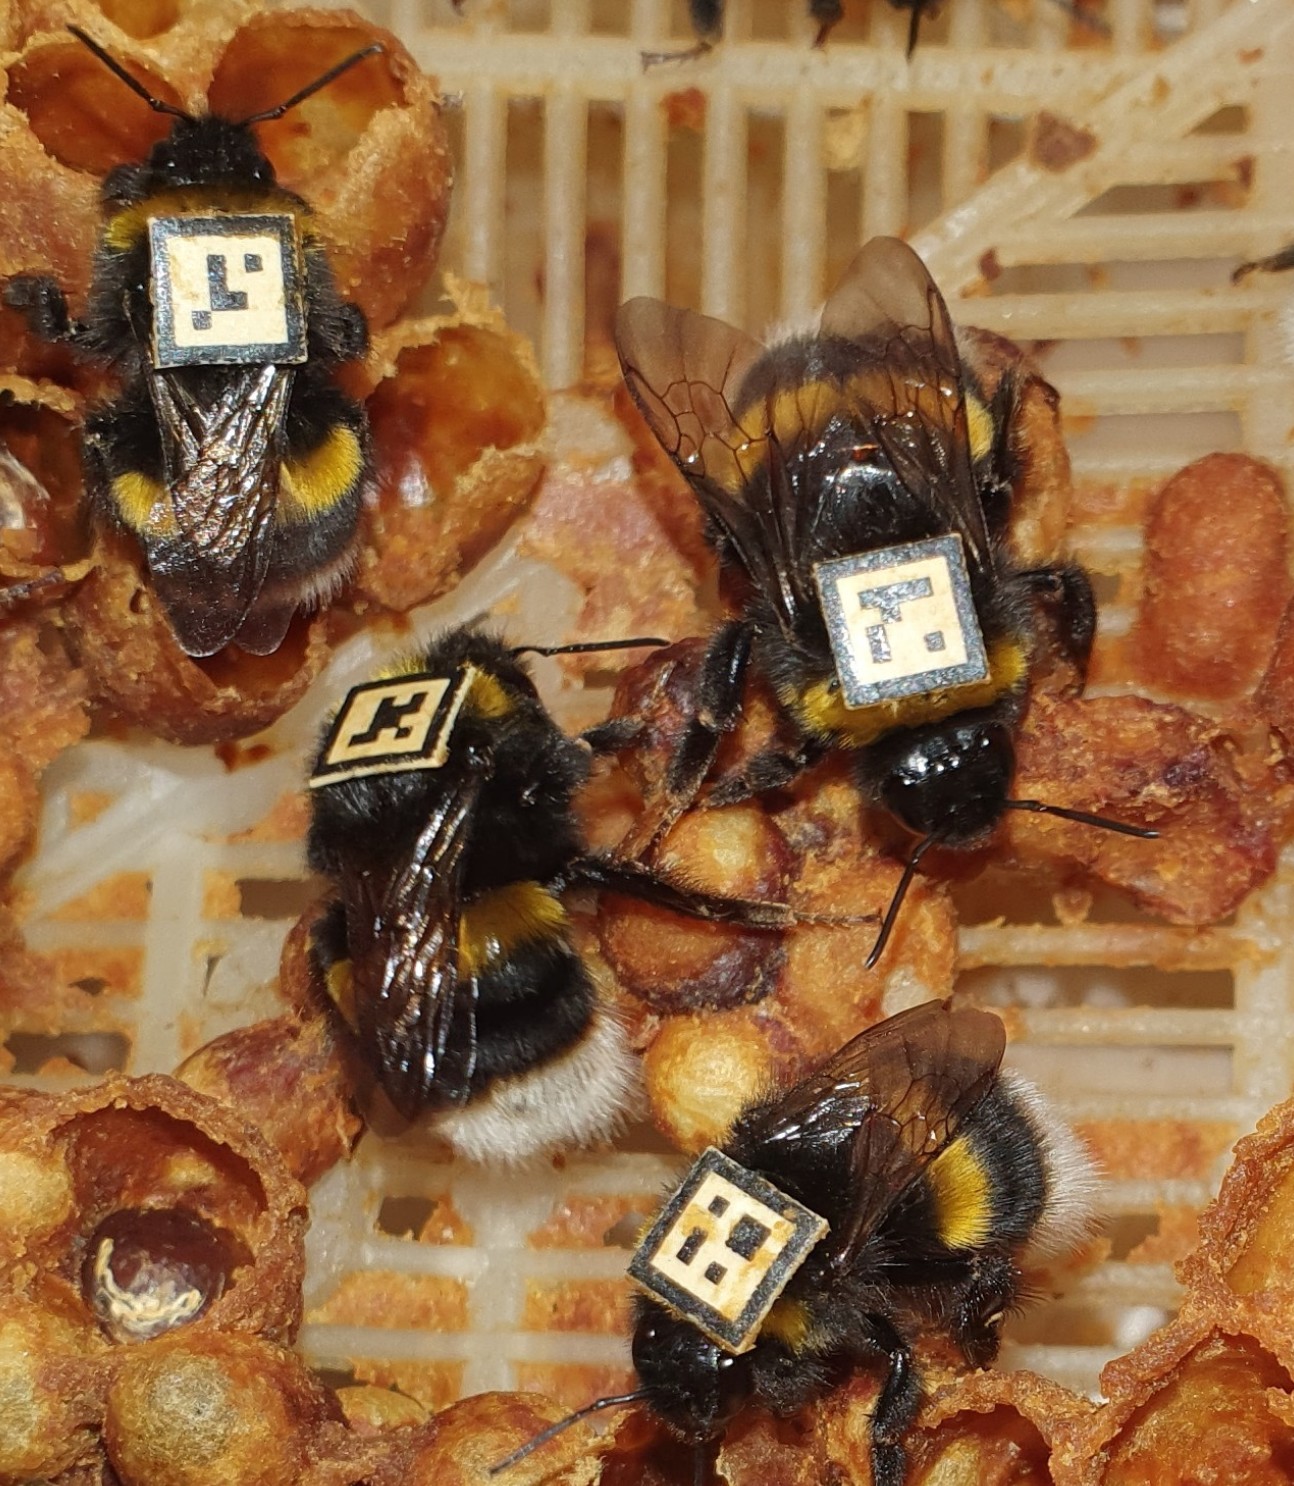 Bees with tiny QR codes on their backs